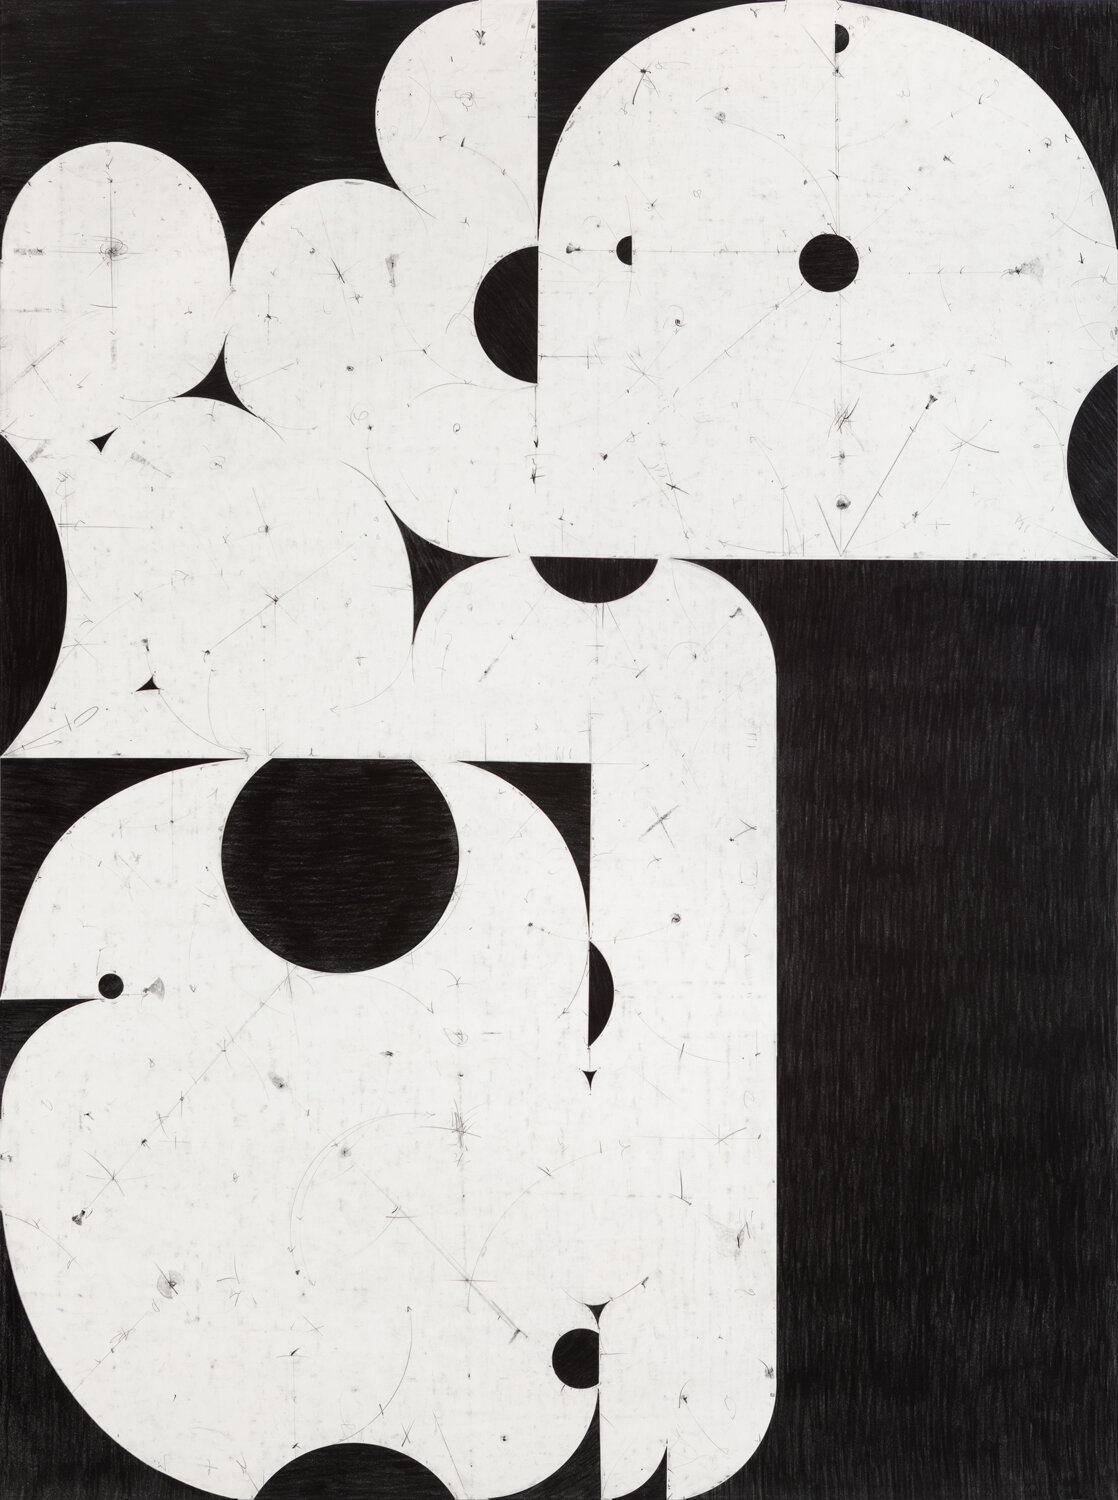  Fragments/Circles#12, 2019, graphite on cut and collaged paper, 69 x 51.5 inches/ 175 x 131 cm 